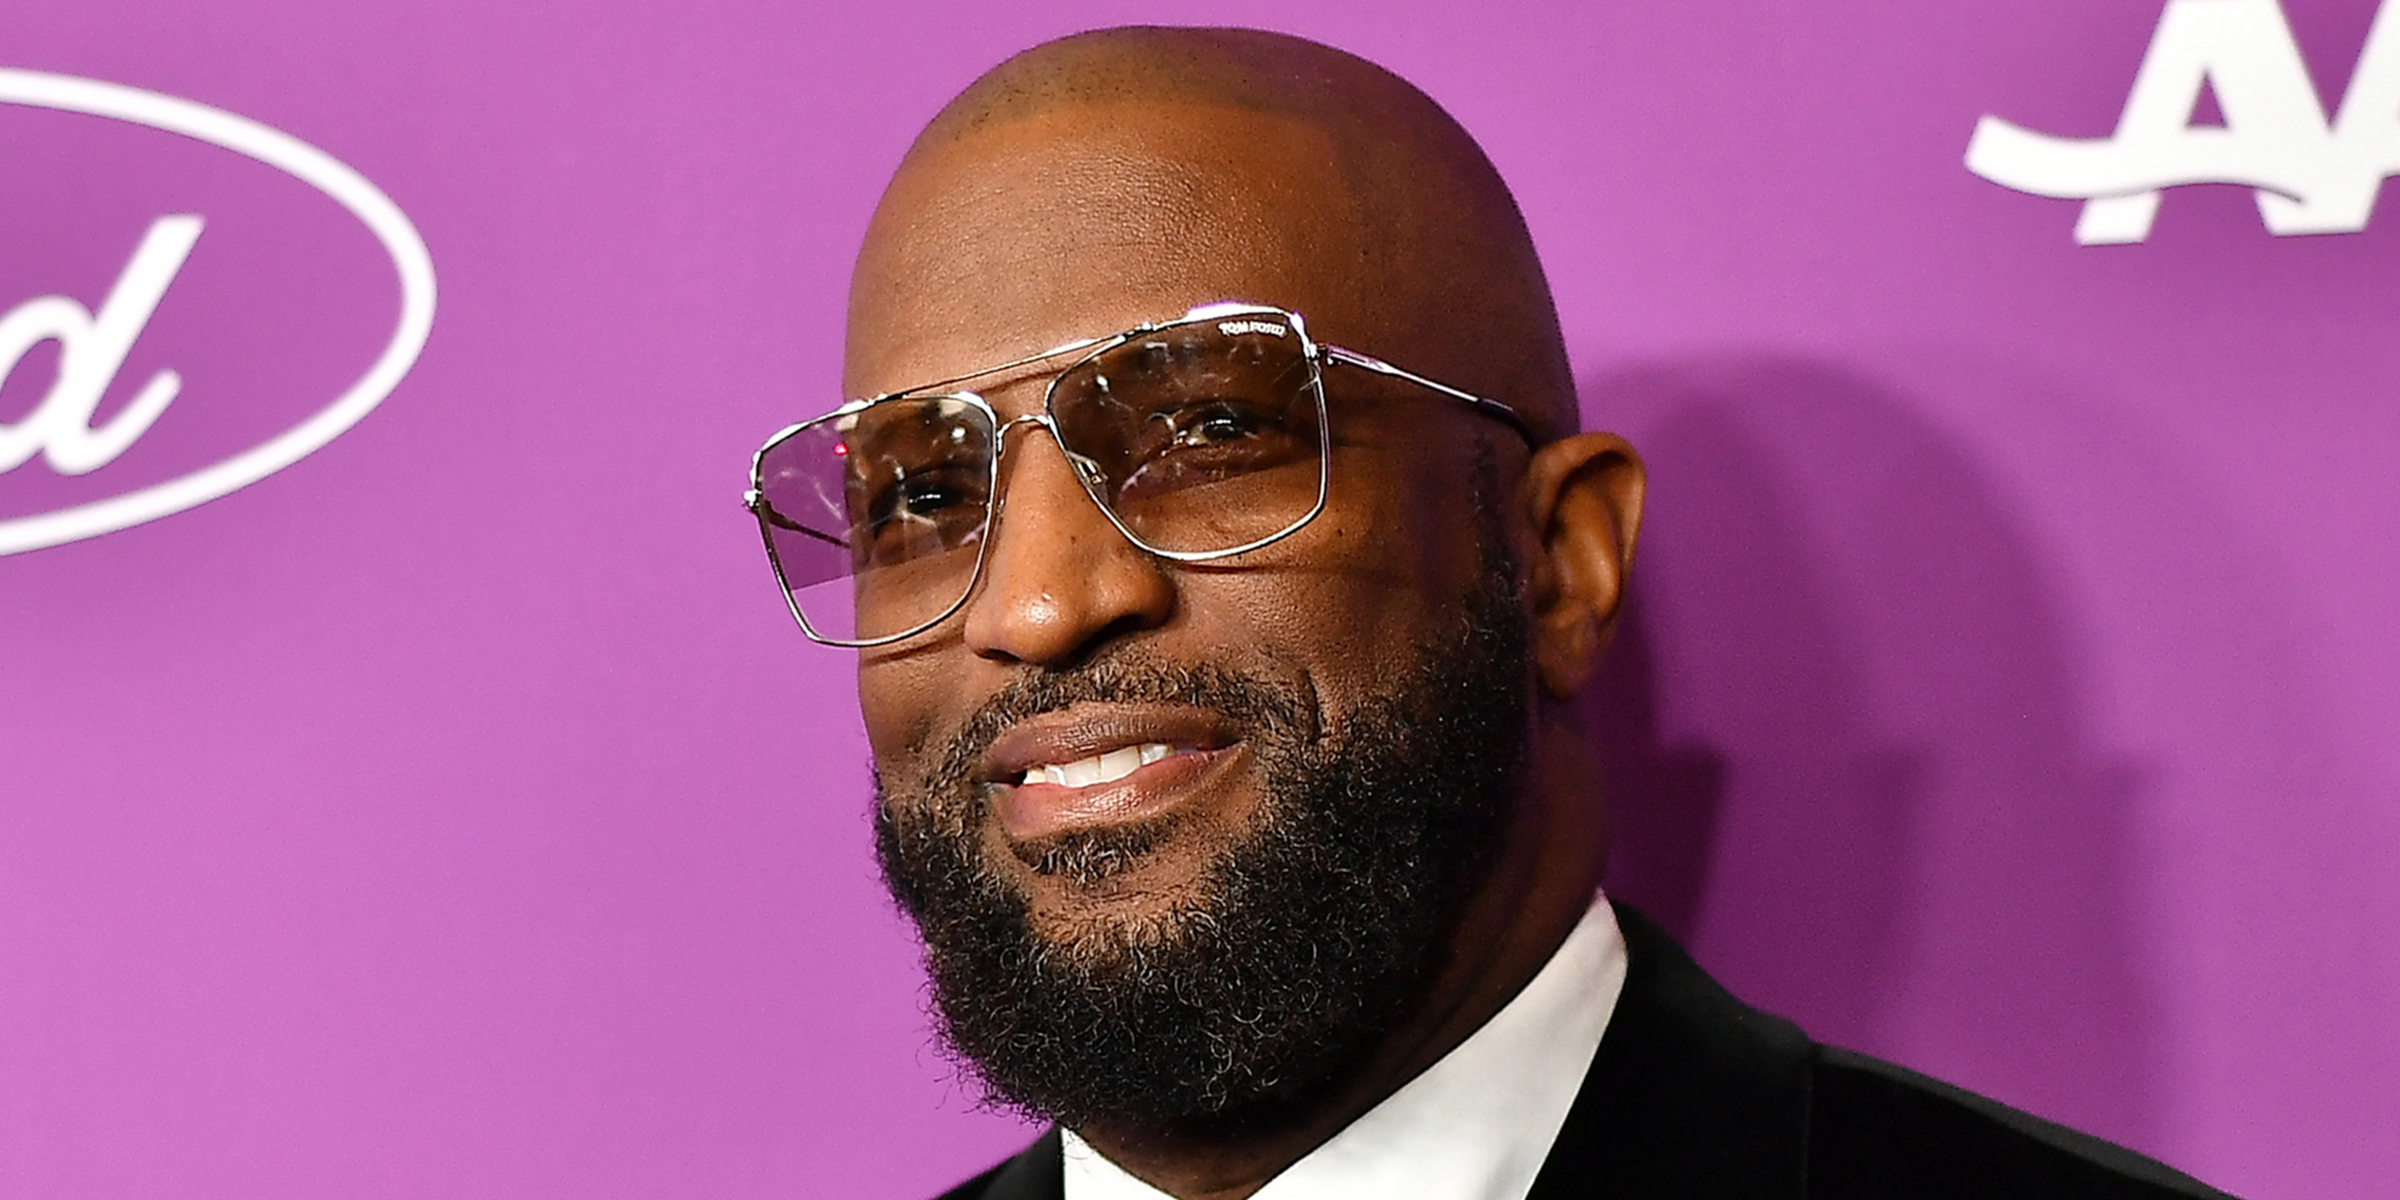 Rickey Smiley's Biography, Nationality, Age, Properties, Weight, Height